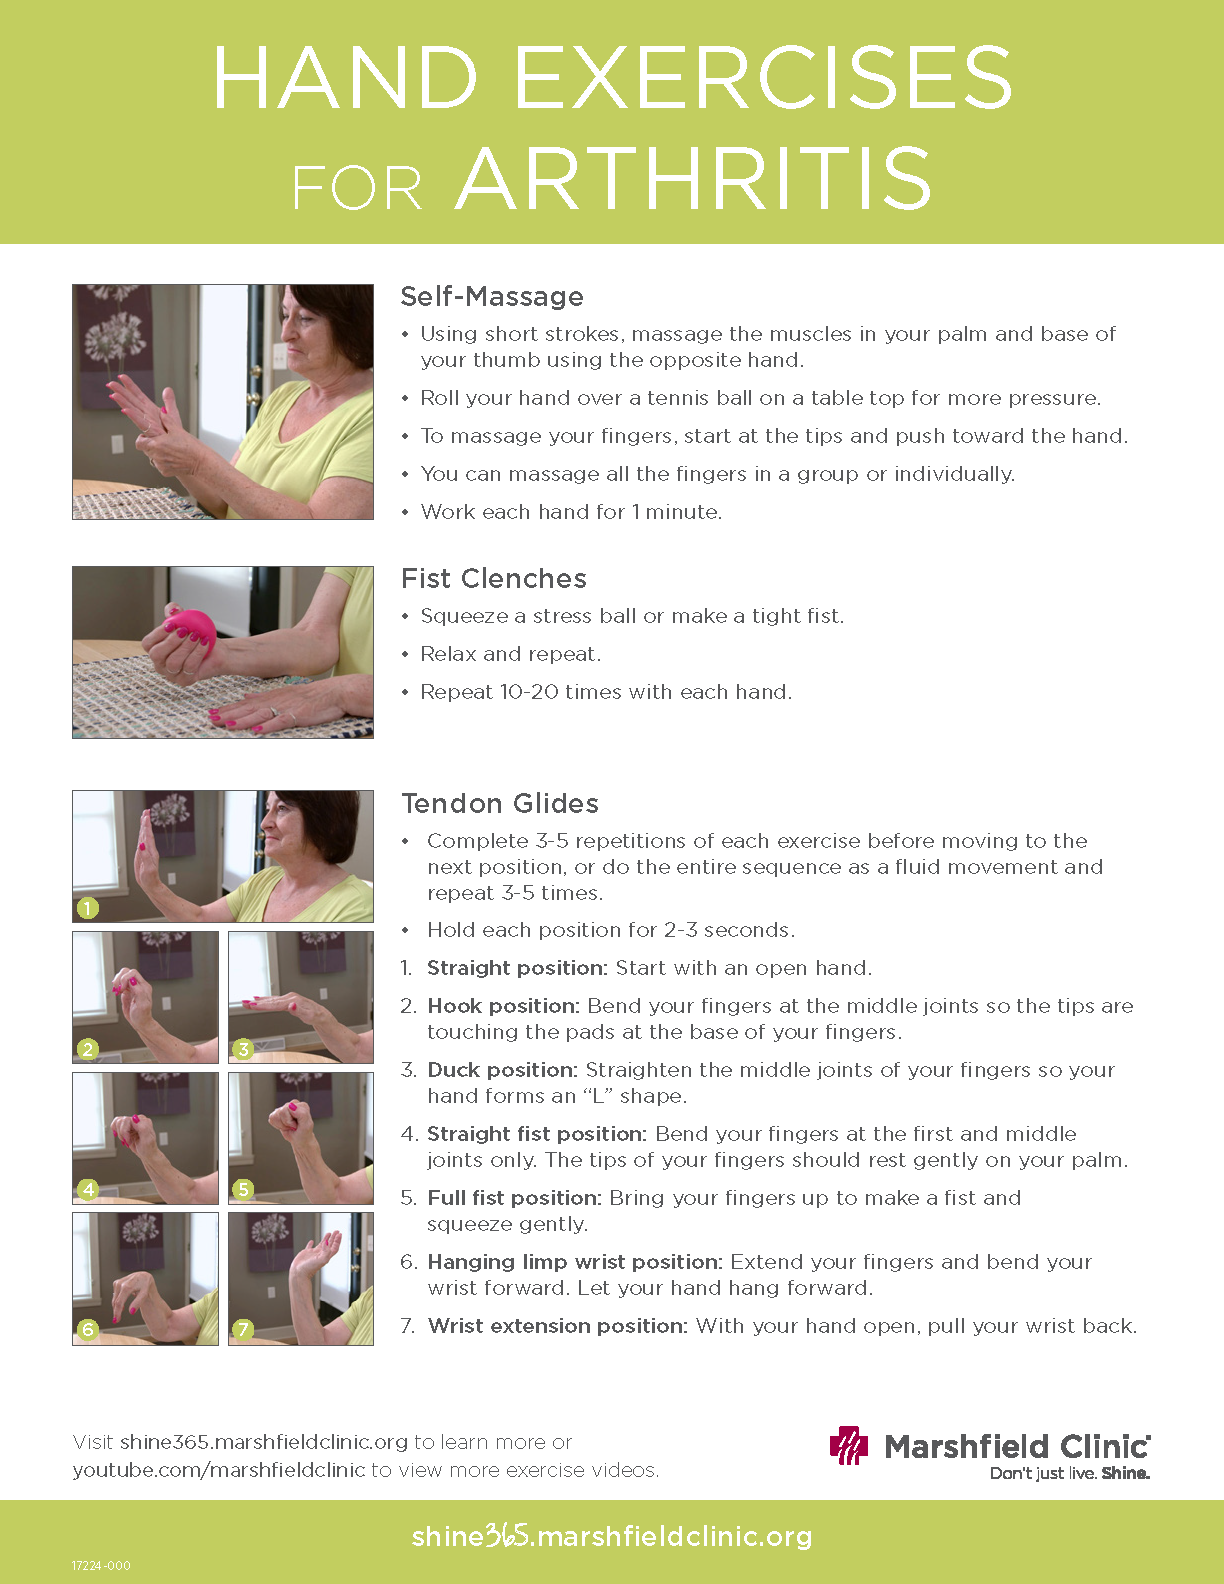 Video Hand Exercises To Relieve Arthritis Pain Shine365 From